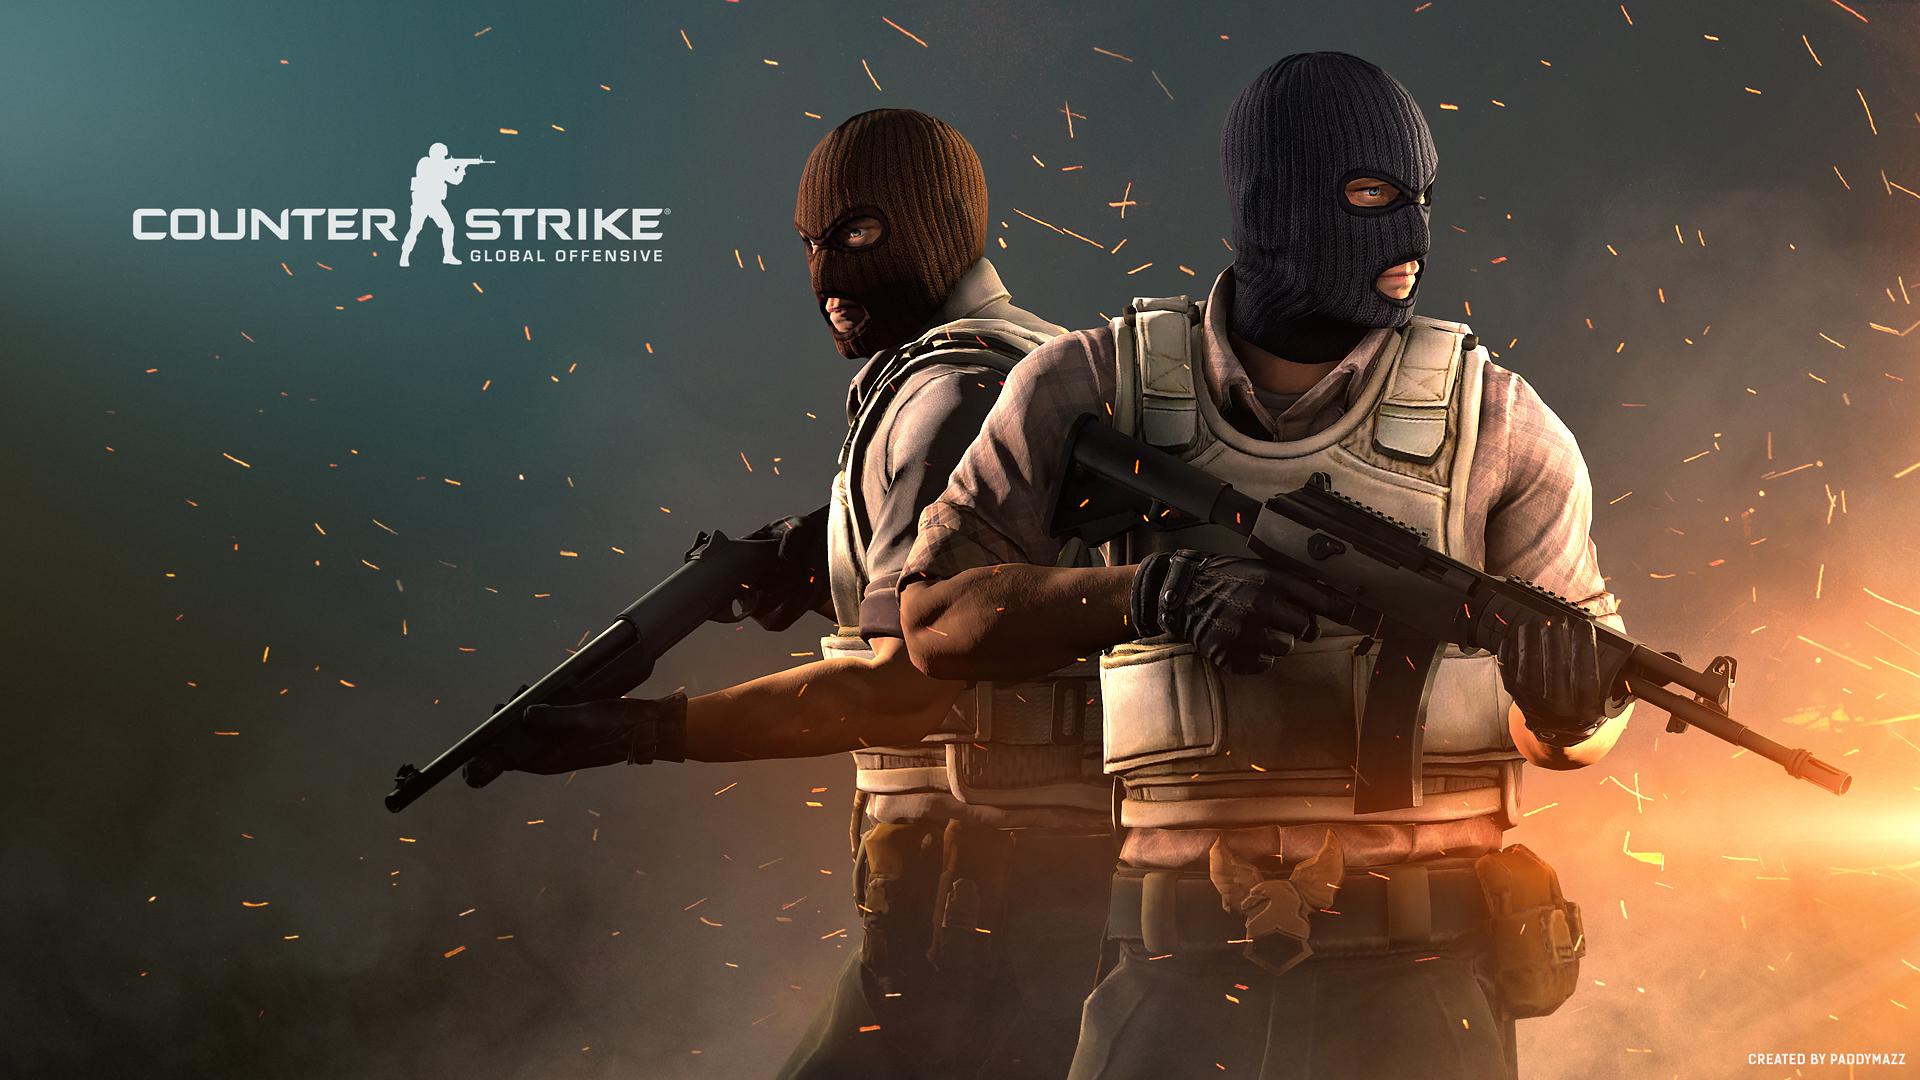 Is Counter-Strike 2 coming to PS5 and PS4 consoles?